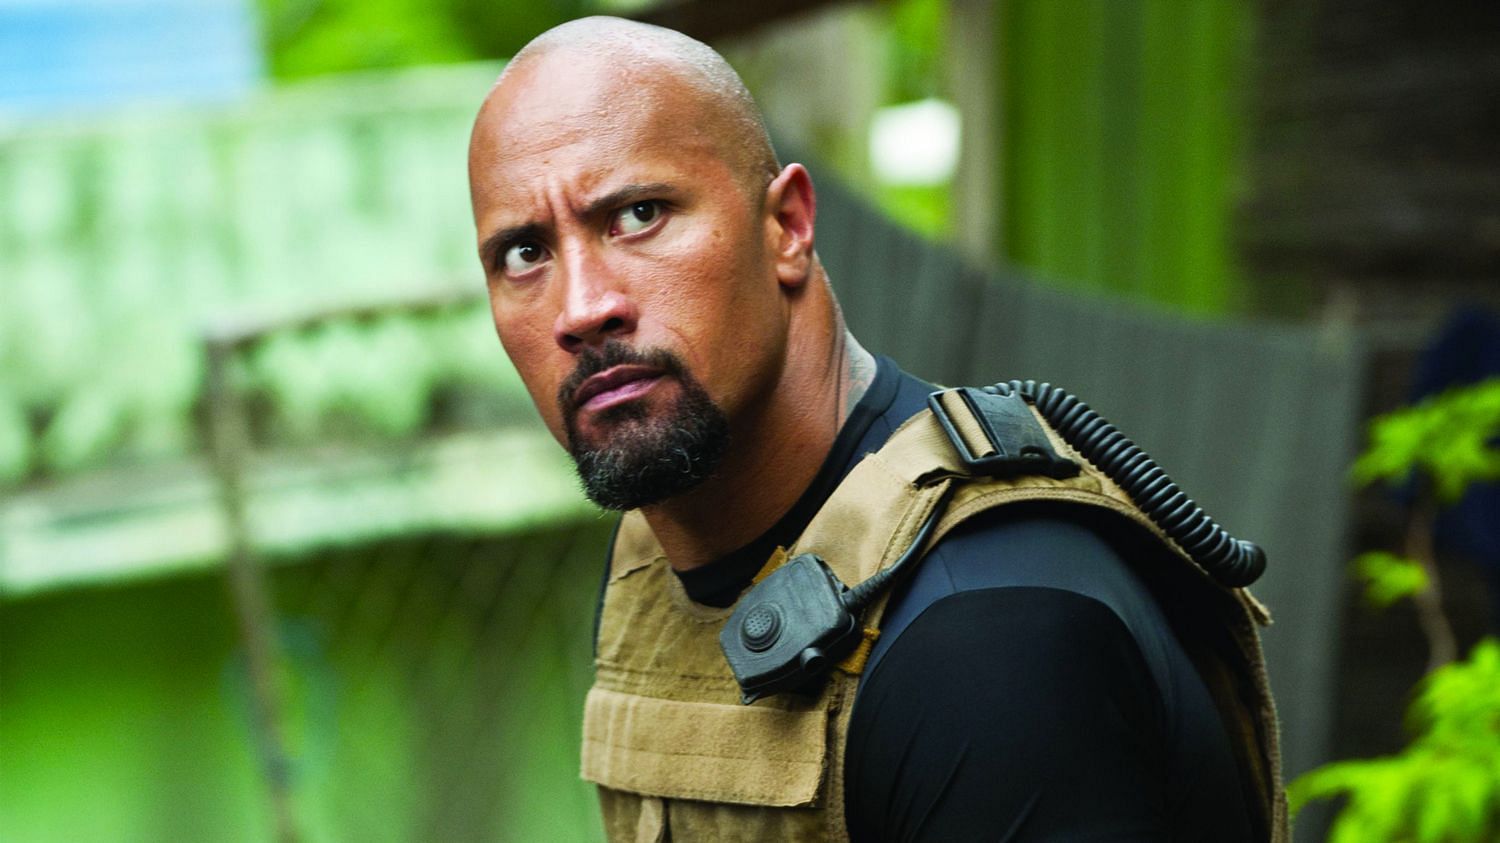 Upcoming Call of Duty movie could feature Dwayne “The Rock” Johnson